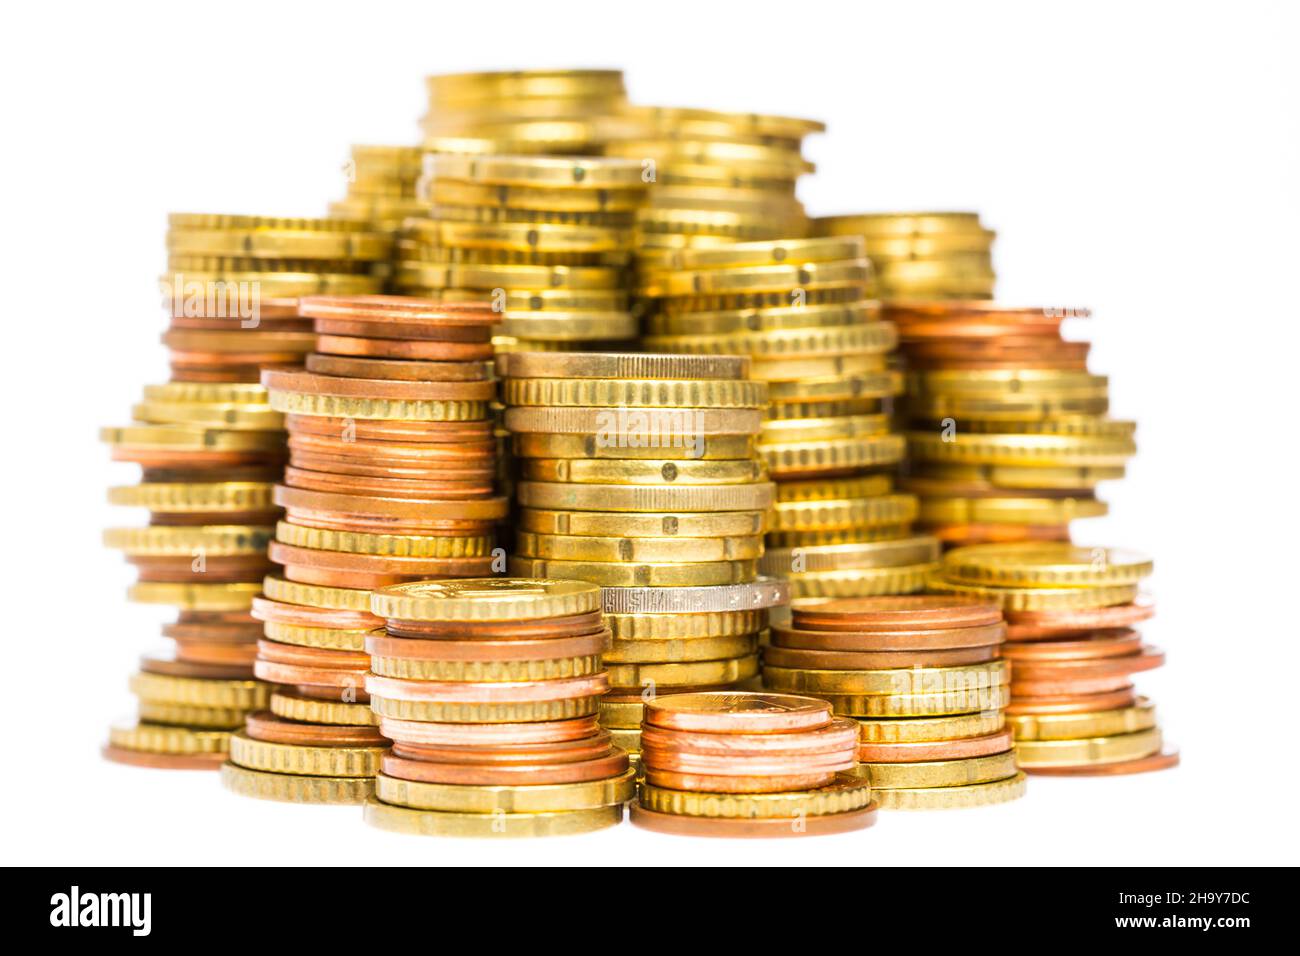 coins, many, white, money, stack of coins, euro, tower, coin, shiny, stack, change money, euros spare change, cash, treasure, change, copper, economy, Stock Photo